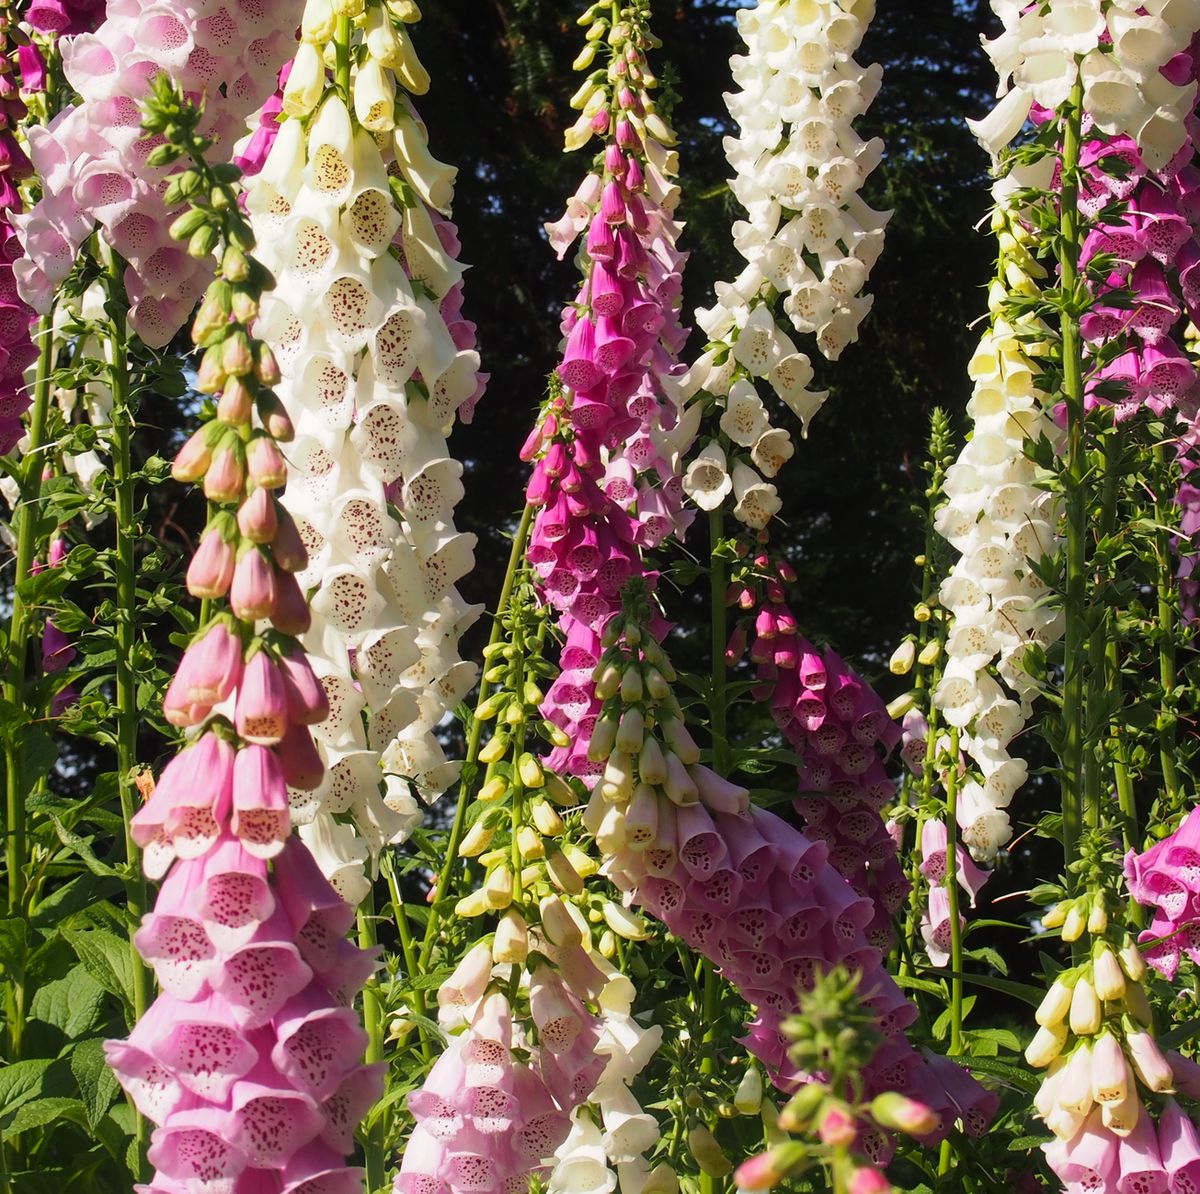 Digitalis, "Foxglove" in various colors from white to purple